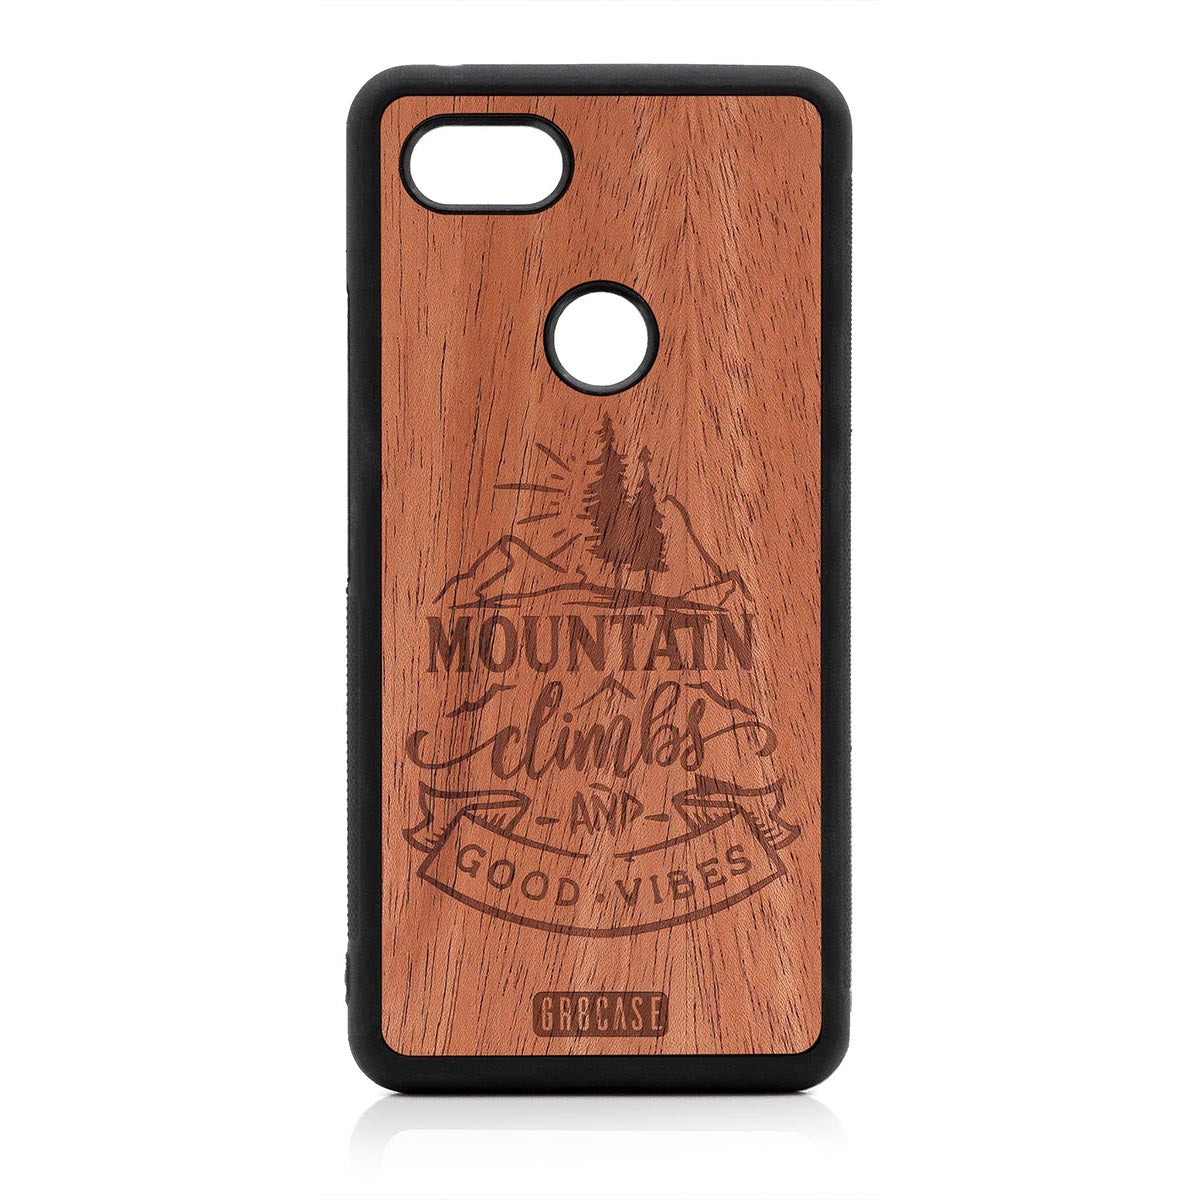 Mountain Climbs And Good Vibes Design Wood Case Google Pixel 3 XL by GR8CASE